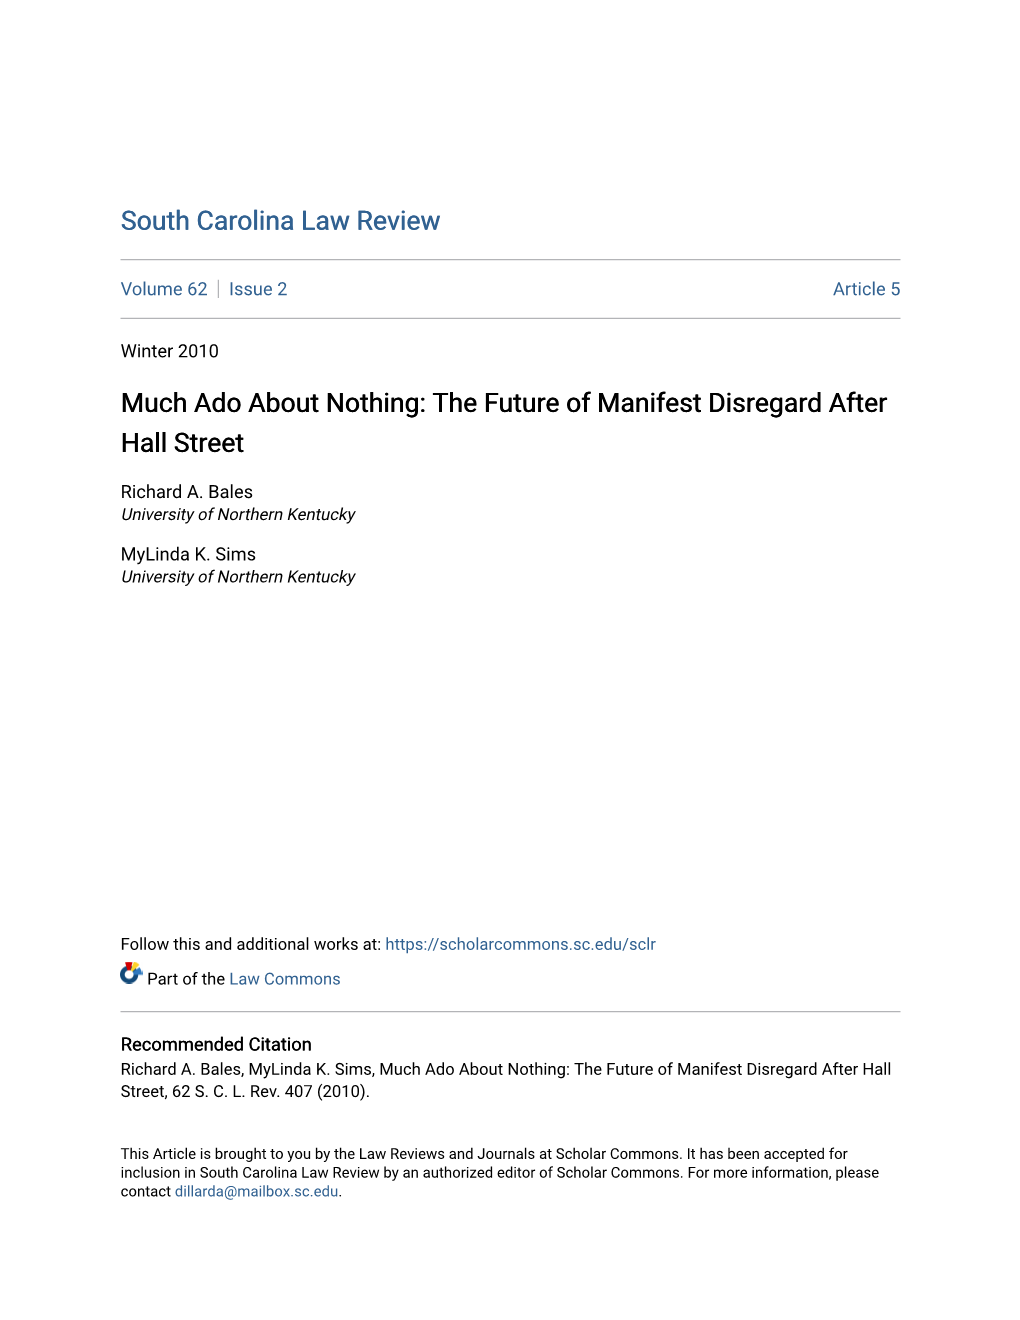 Much Ado About Nothing: the Future of Manifest Disregard After Hall Street